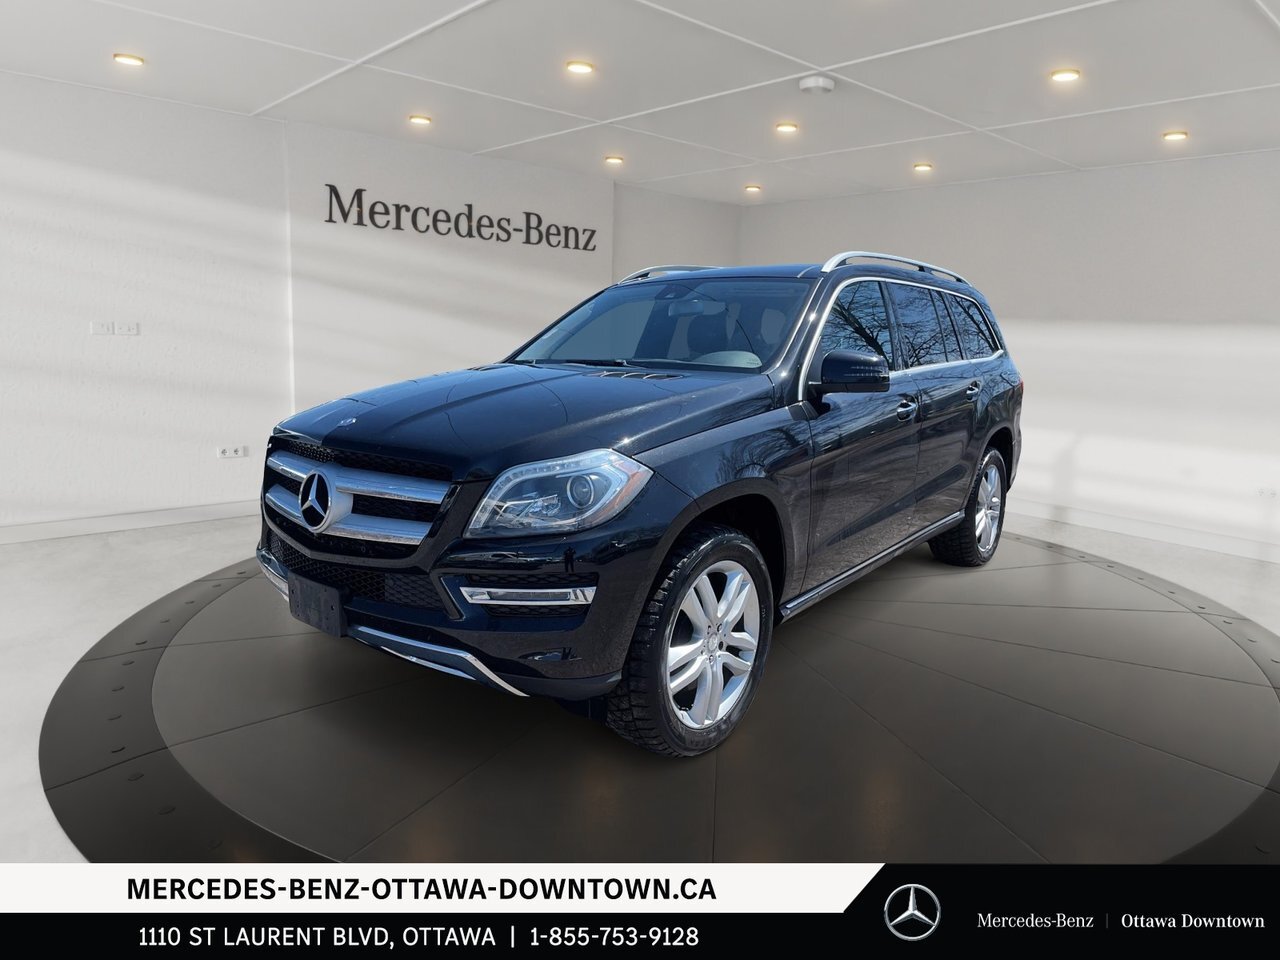 2016 Mercedes-Benz GL350 BlueTEC 4MATIC - well maintained Rare Diesel with 